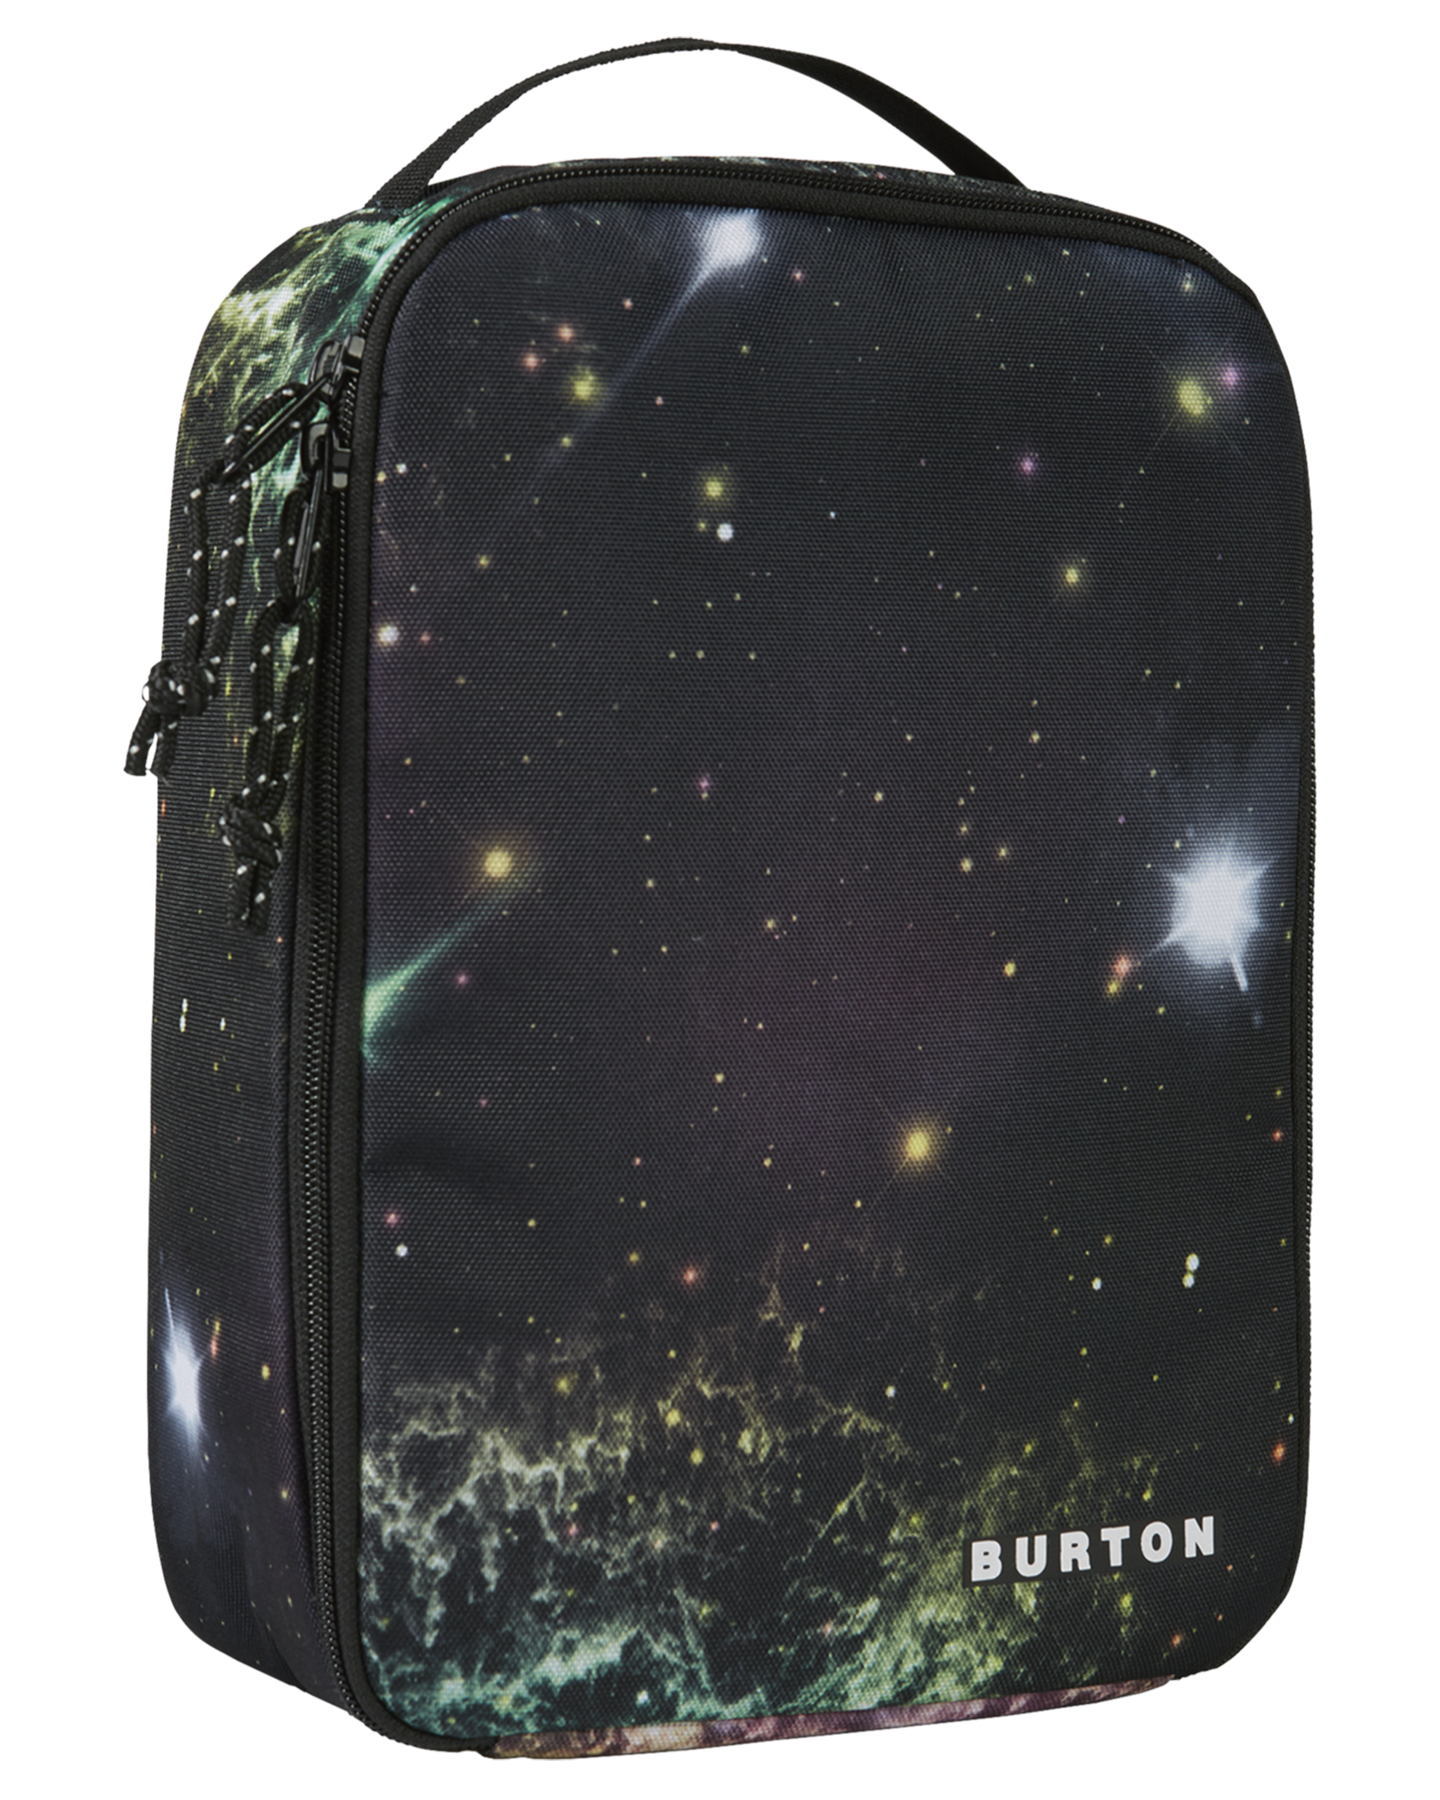 Burton Lunch-N-Box 8L Cooler Bag - Painted Planets Luggage Bags - SnowSkiersWarehouse